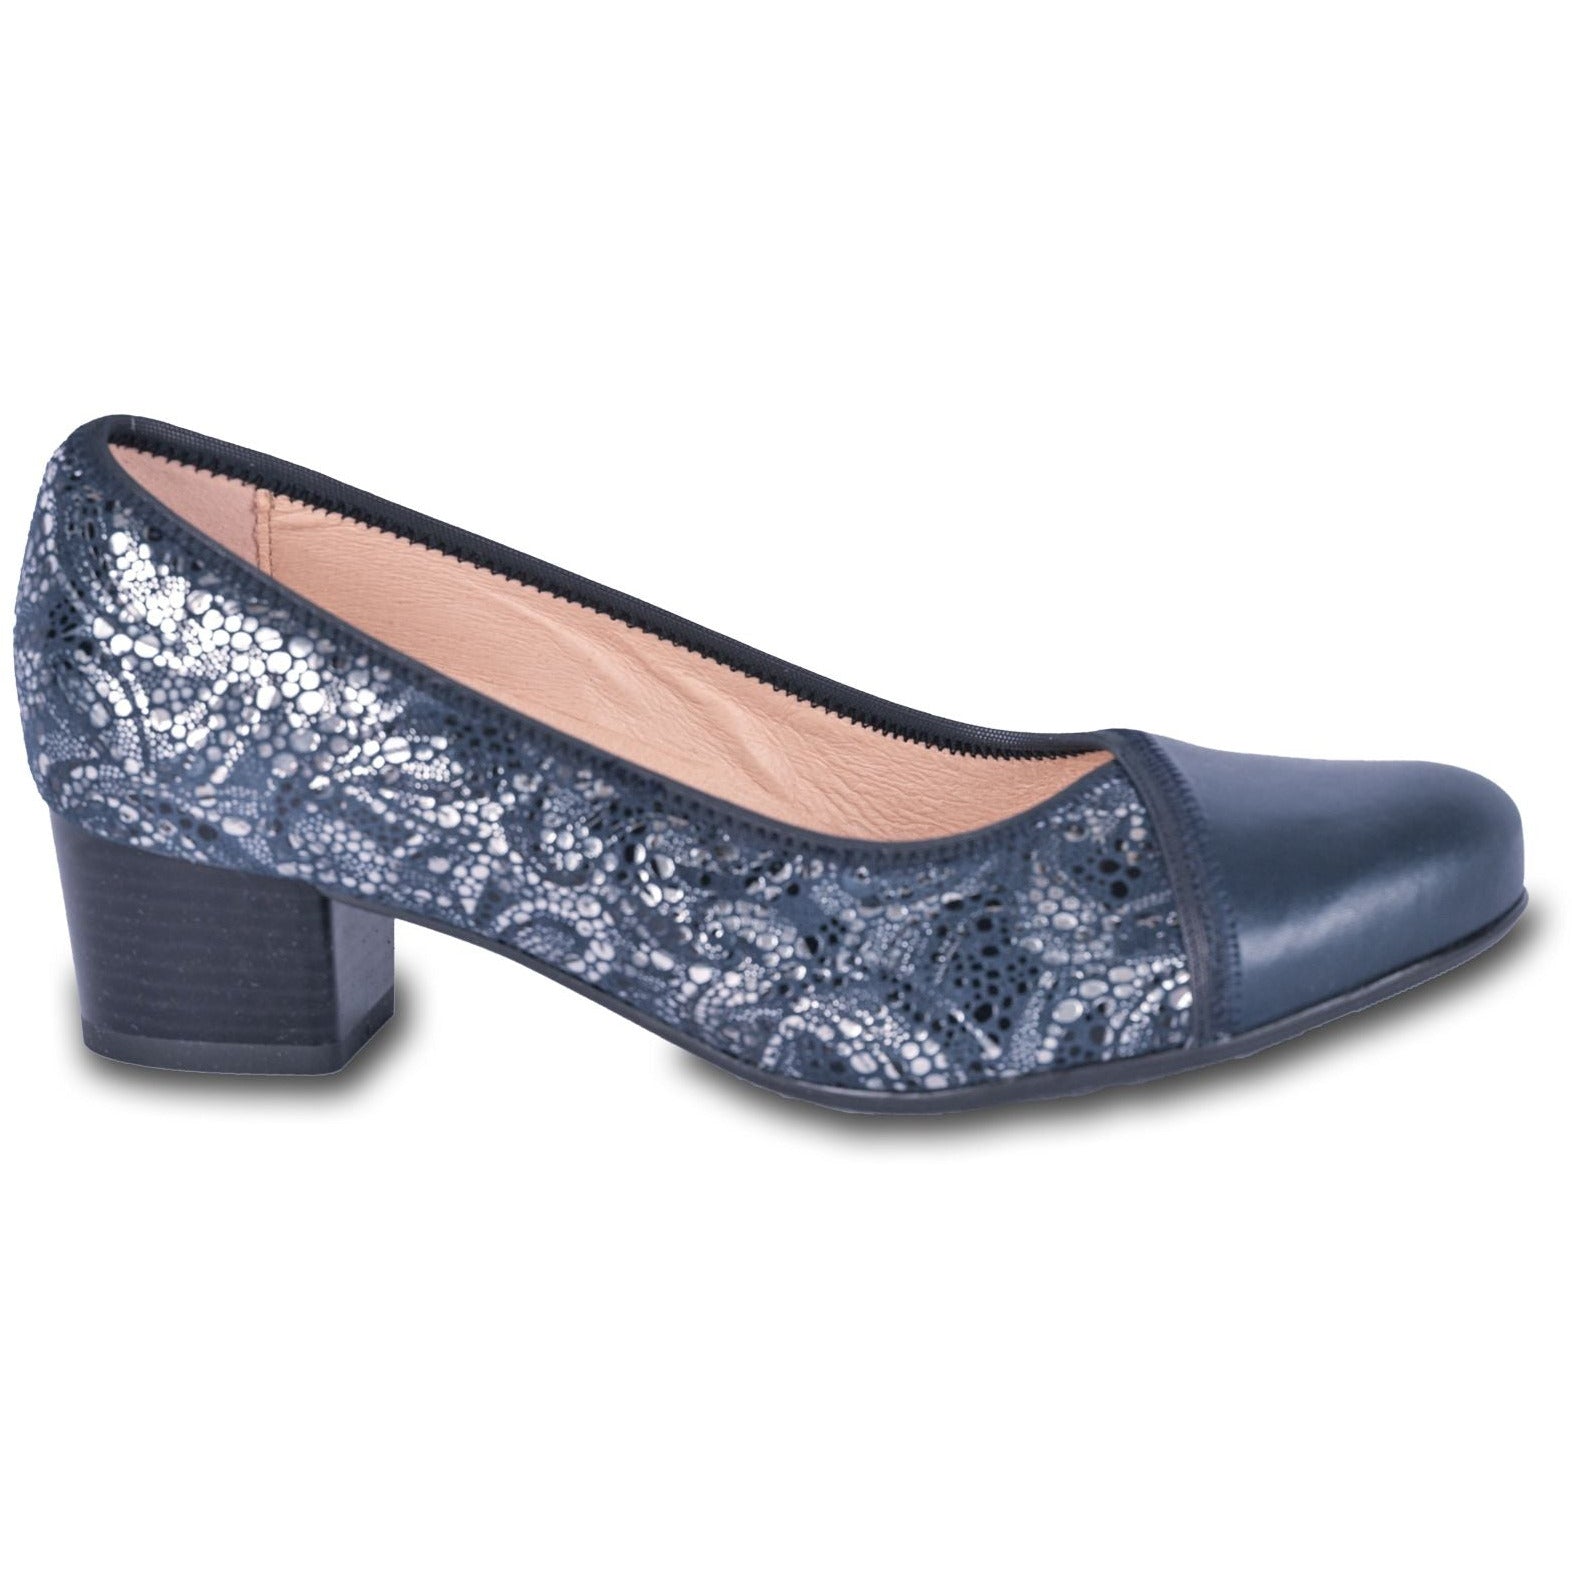 Dark blue women heel pumps with a removable cushioned insole. You can replace it with your own custom made orthotics.